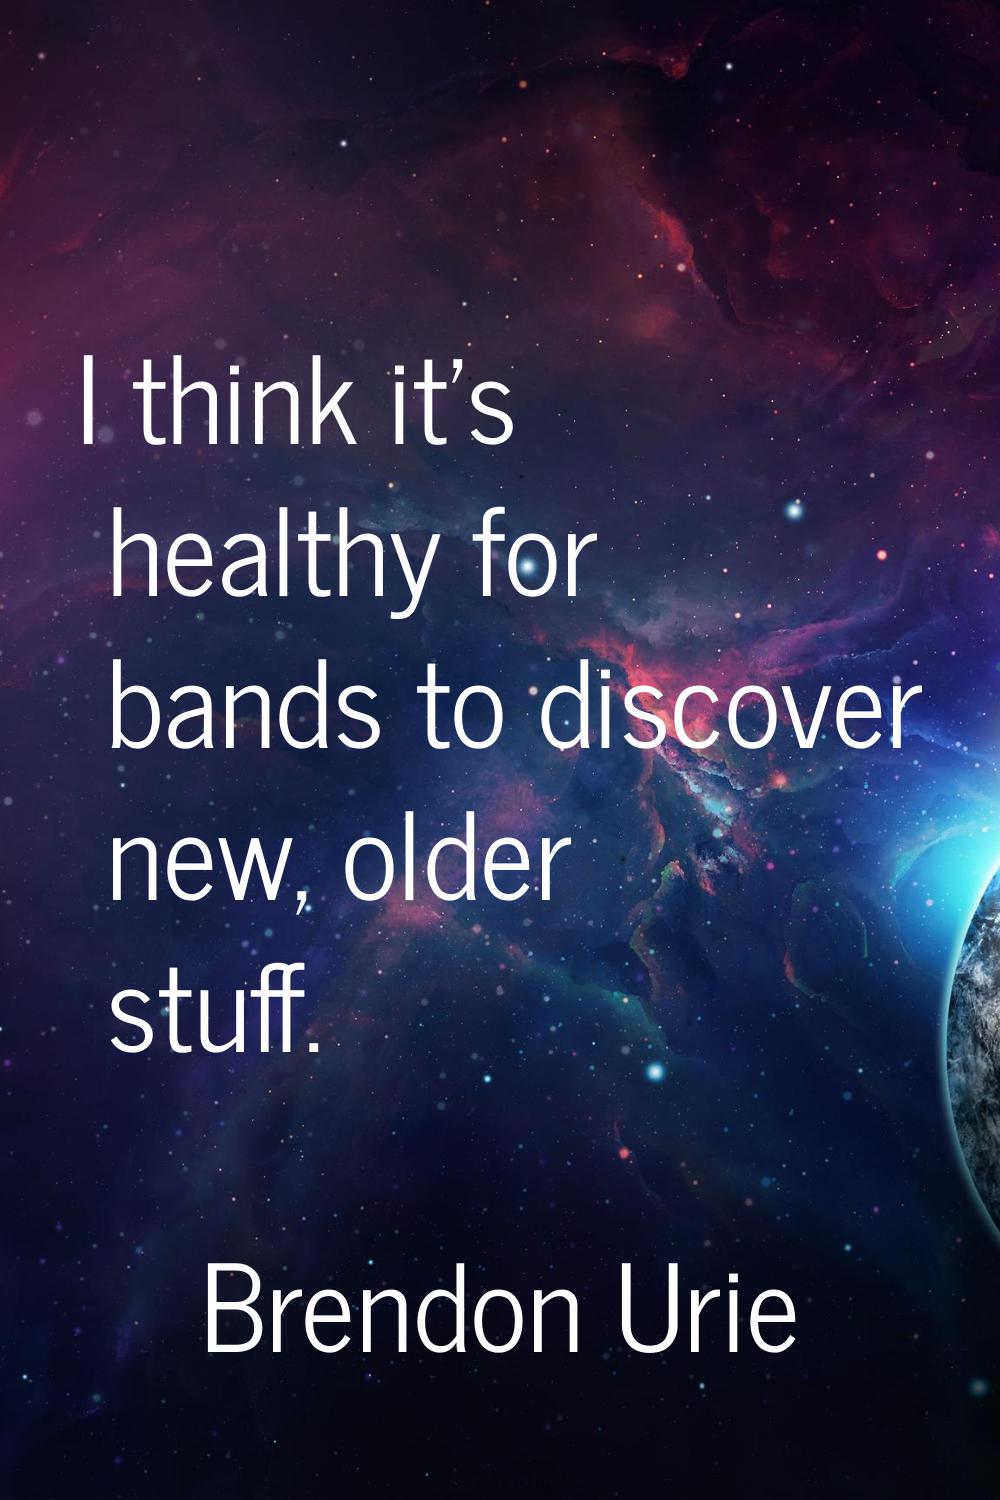 I think it's healthy for bands to discover new, older stuff.